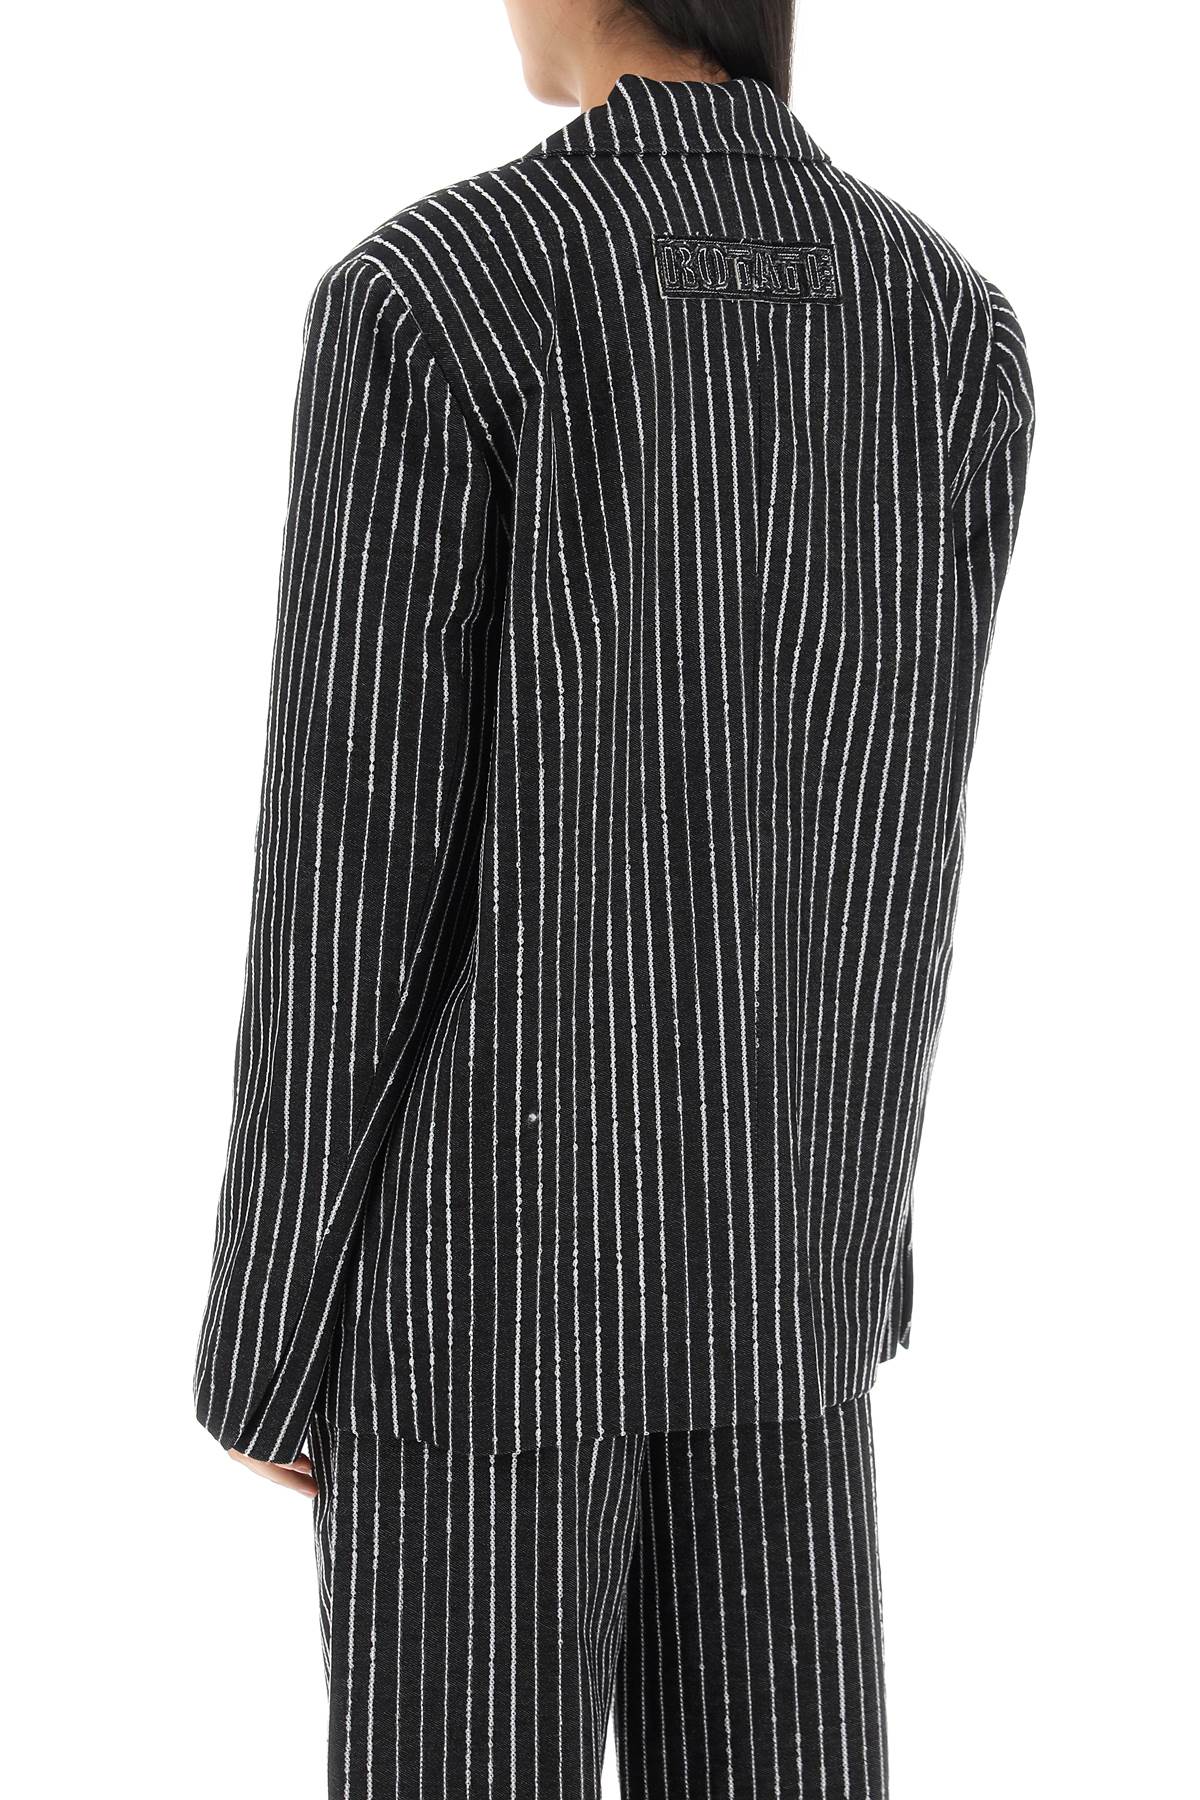 blazer with sequined stripes-2